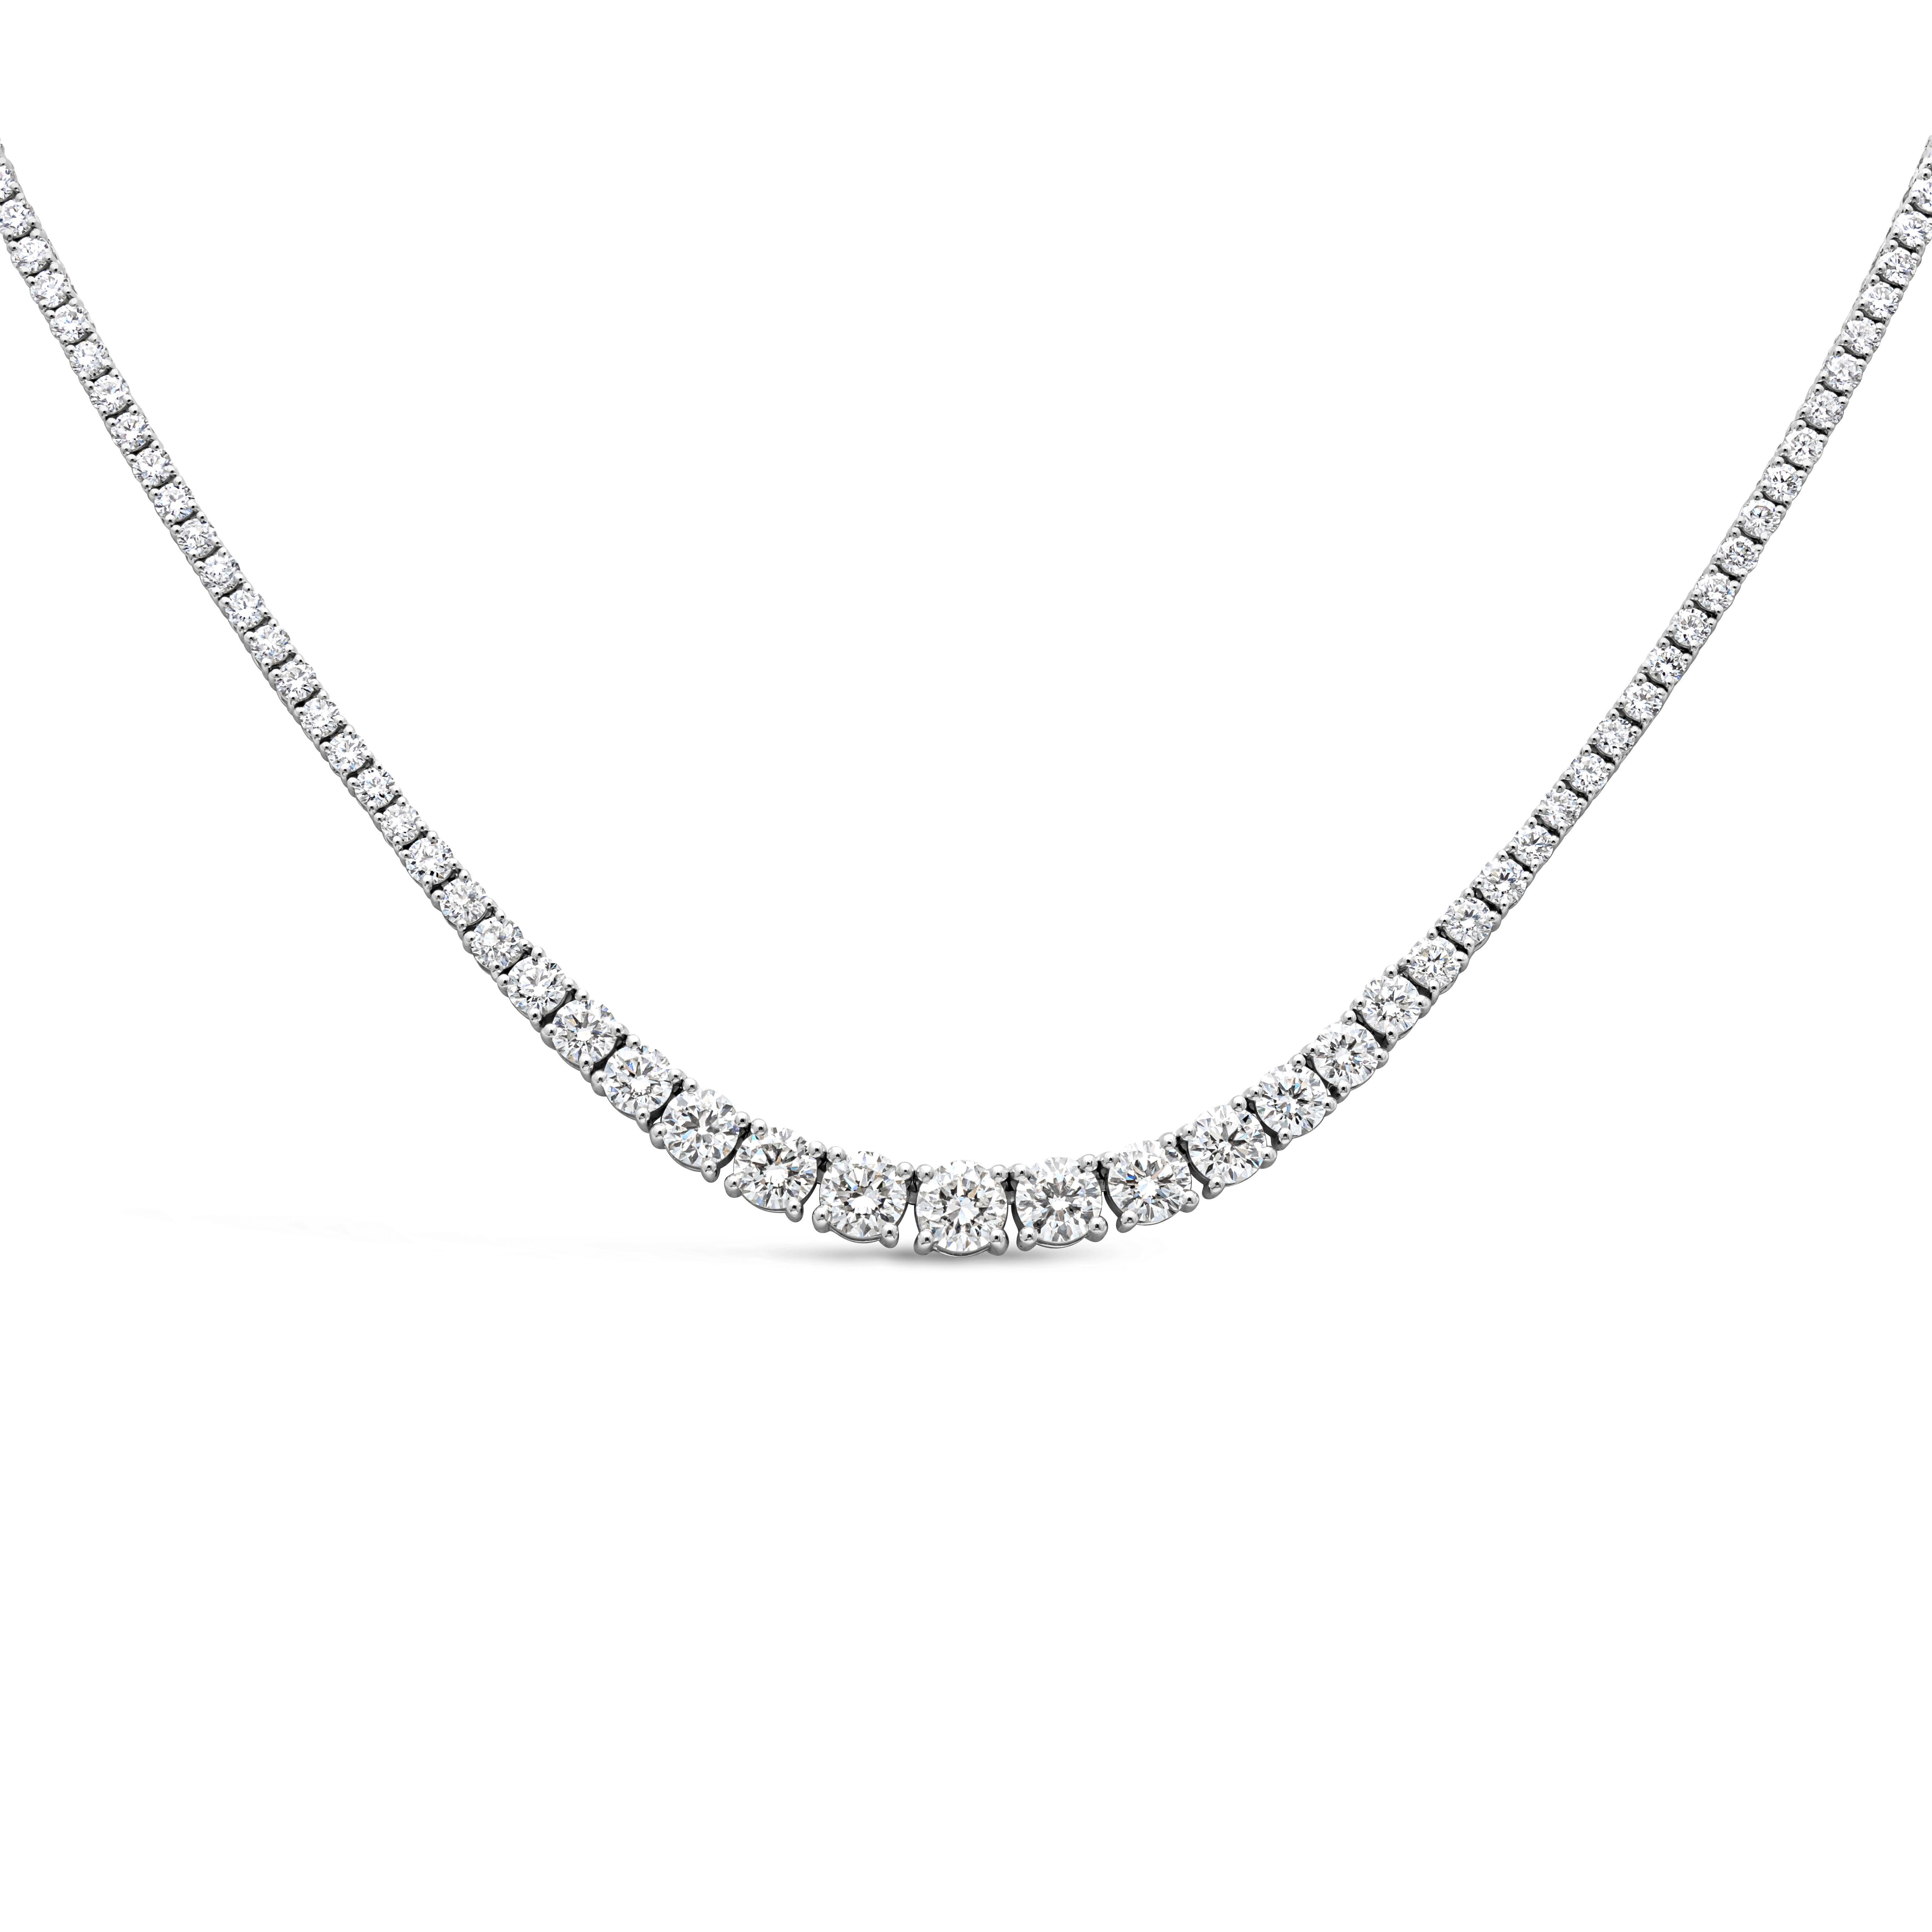 A brilliant and classic piece of jewelry showcasing a line of round brilliant diamonds that elegantly get larger to the center of the necklace. Diamonds weigh 5.72 carats, largest diamond at the center weighs 2.90 carats GH Color and VS in Clarity.